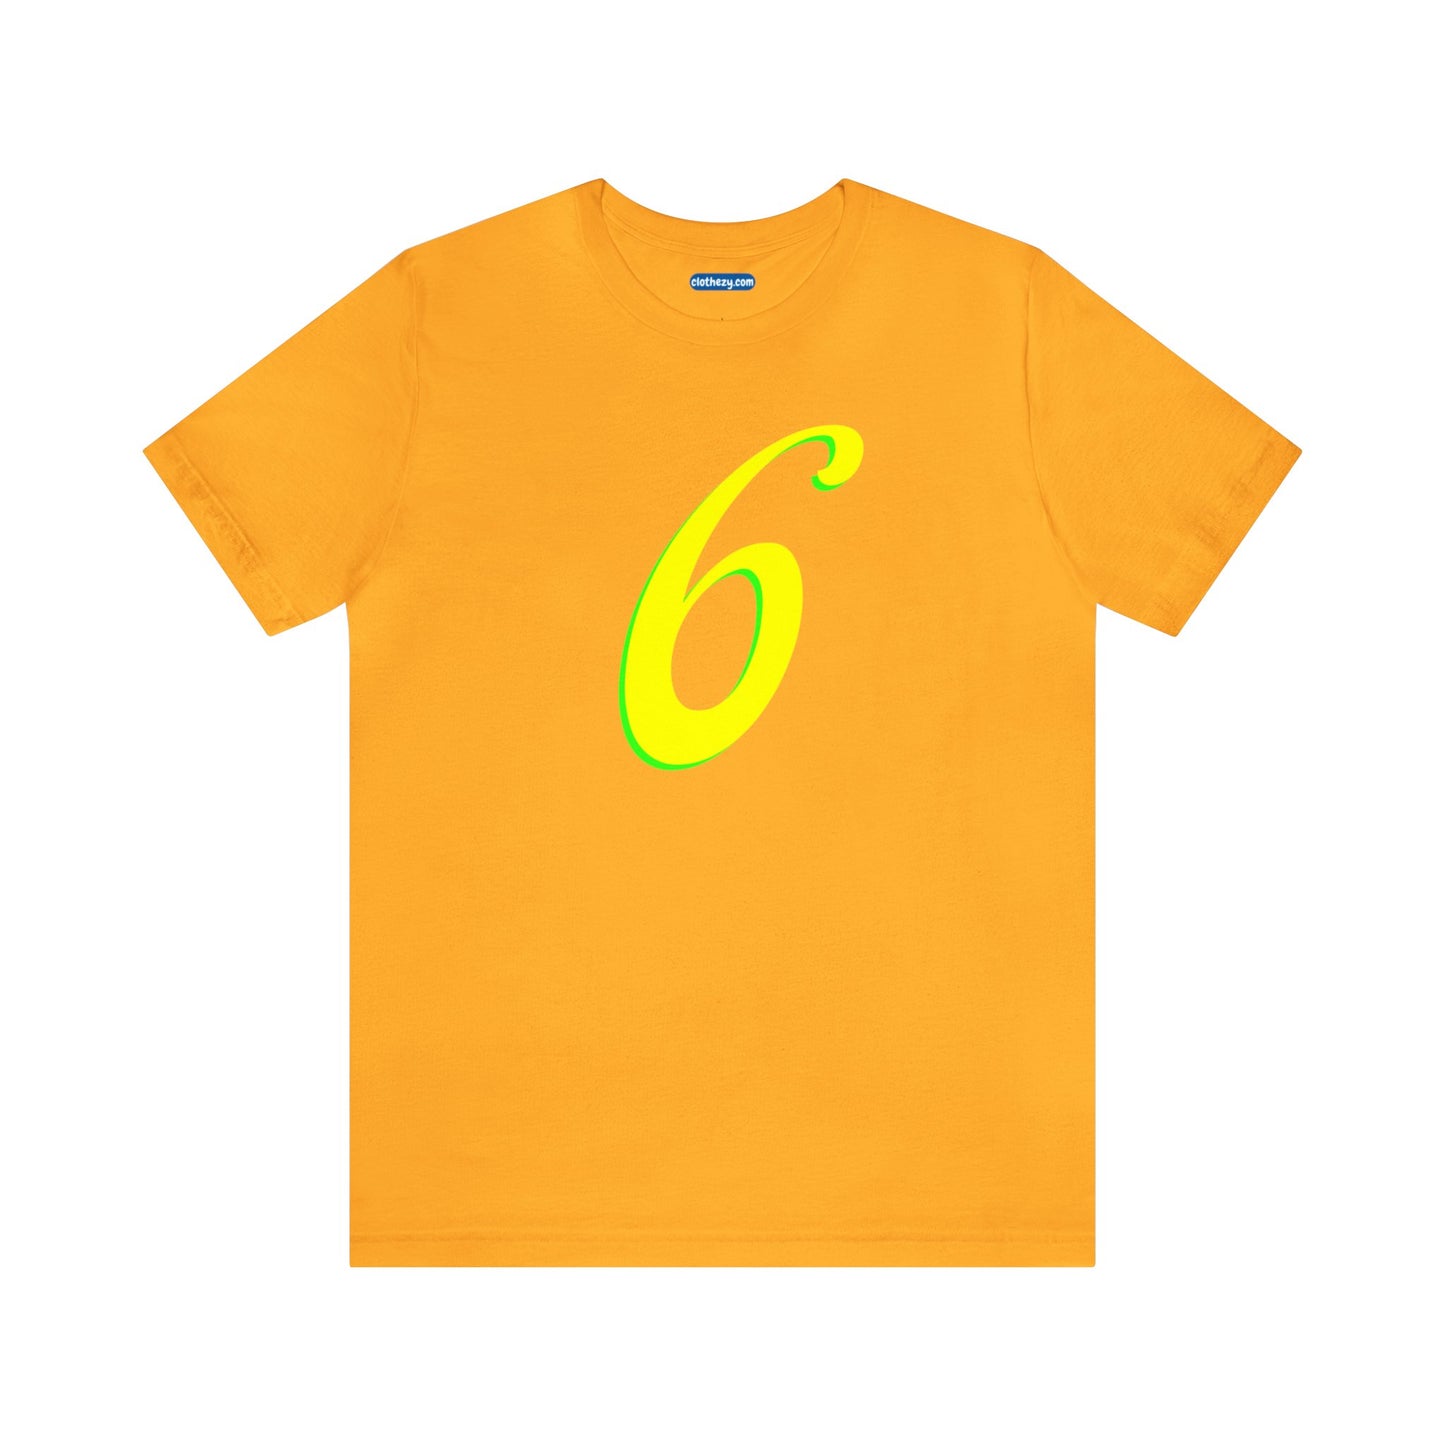 Number 6 Design - Soft Cotton Tee for birthdays and celebrations, Gift for friends and family, Multiple Options by clothezy.com in Green Heather Size Small - Buy Now